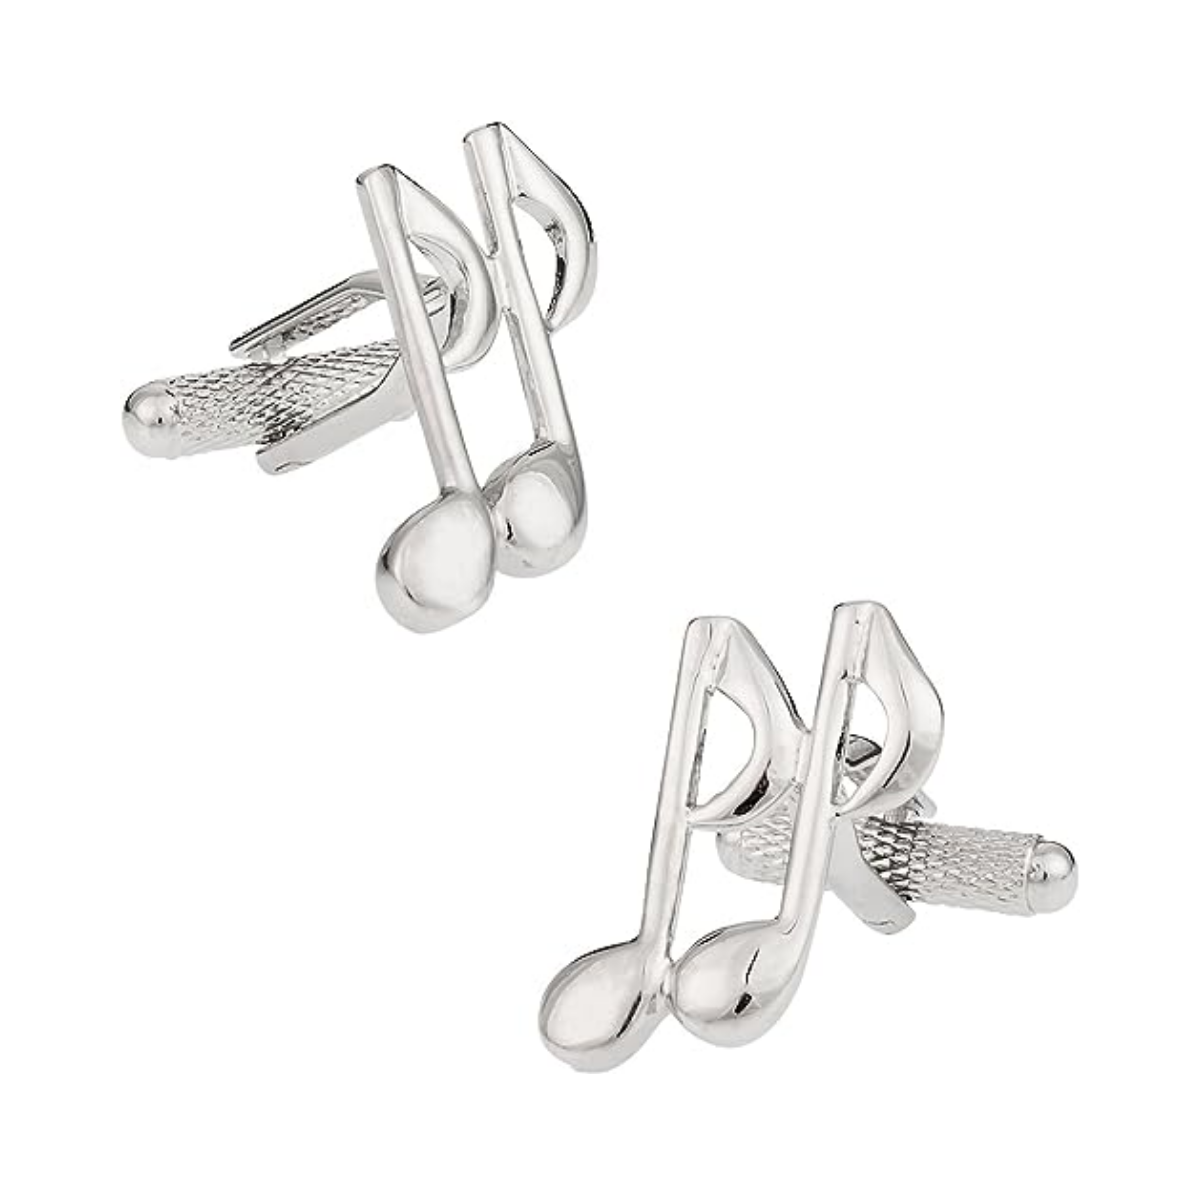 30. Rock Your Style: Music-Themed Cufflinks - The Perfect 1st Anniversary Gift for Him